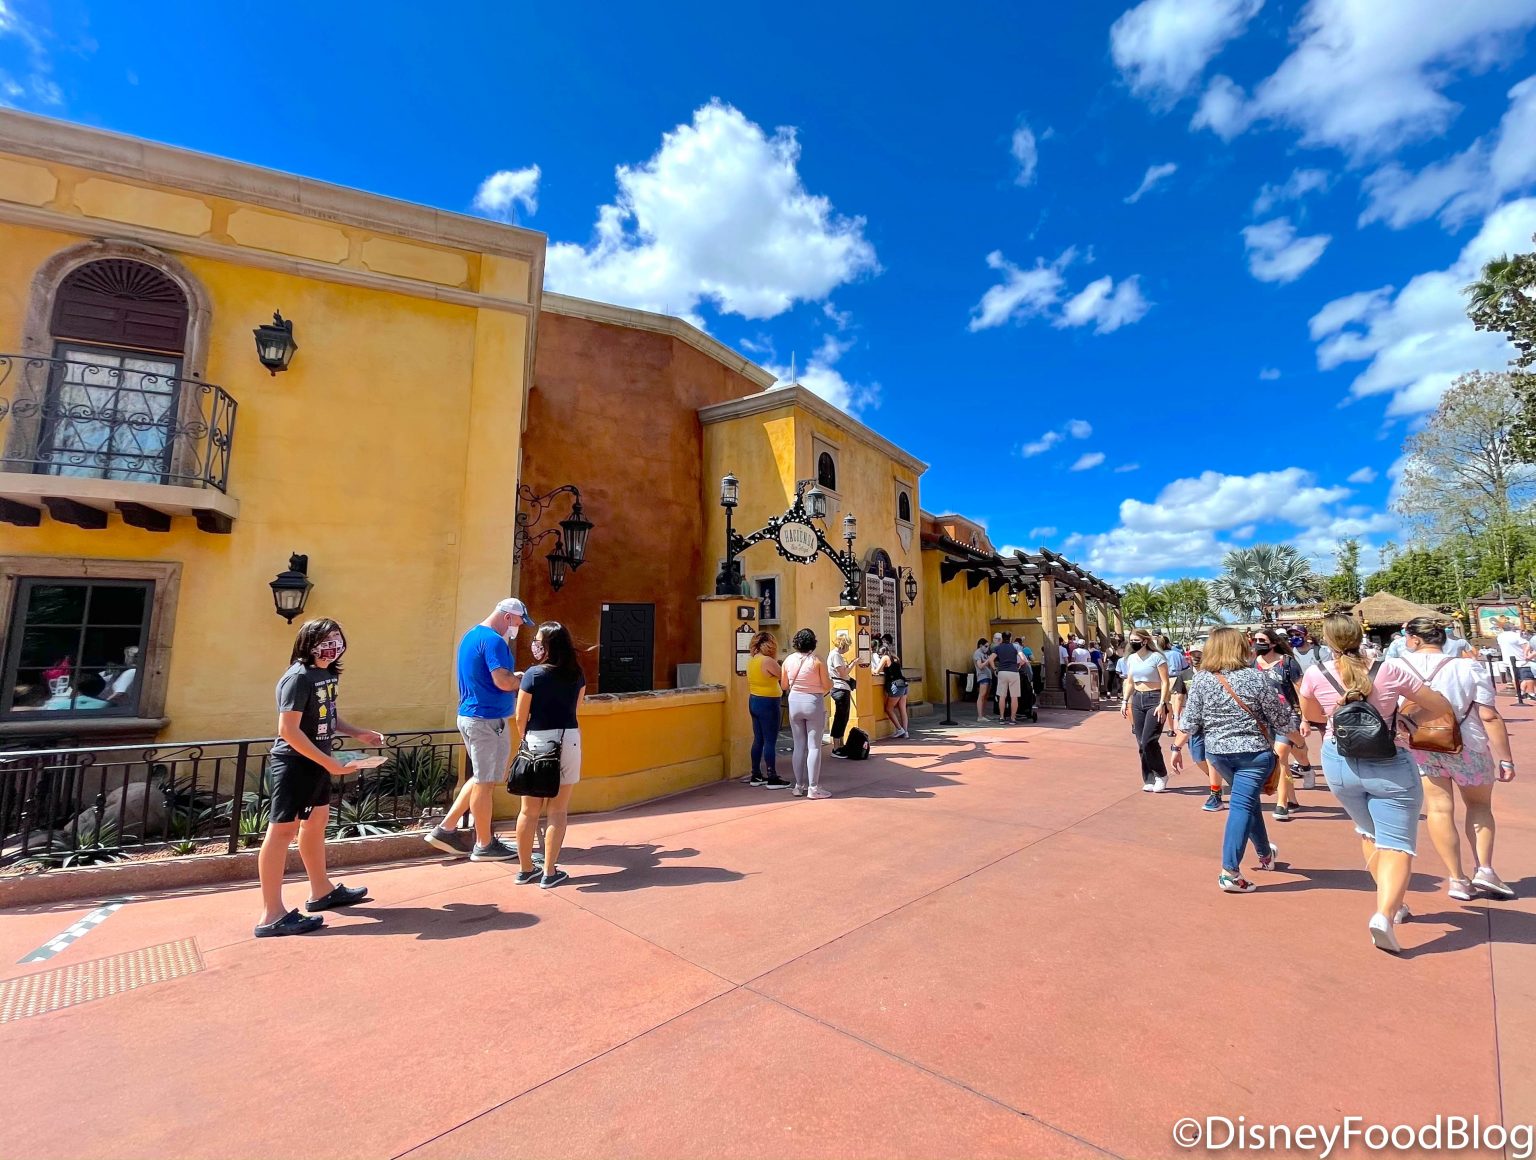 2021 Reopening Wdw Epcot Mexico Pavilion Crowds Wait Times 2 1536x1160 